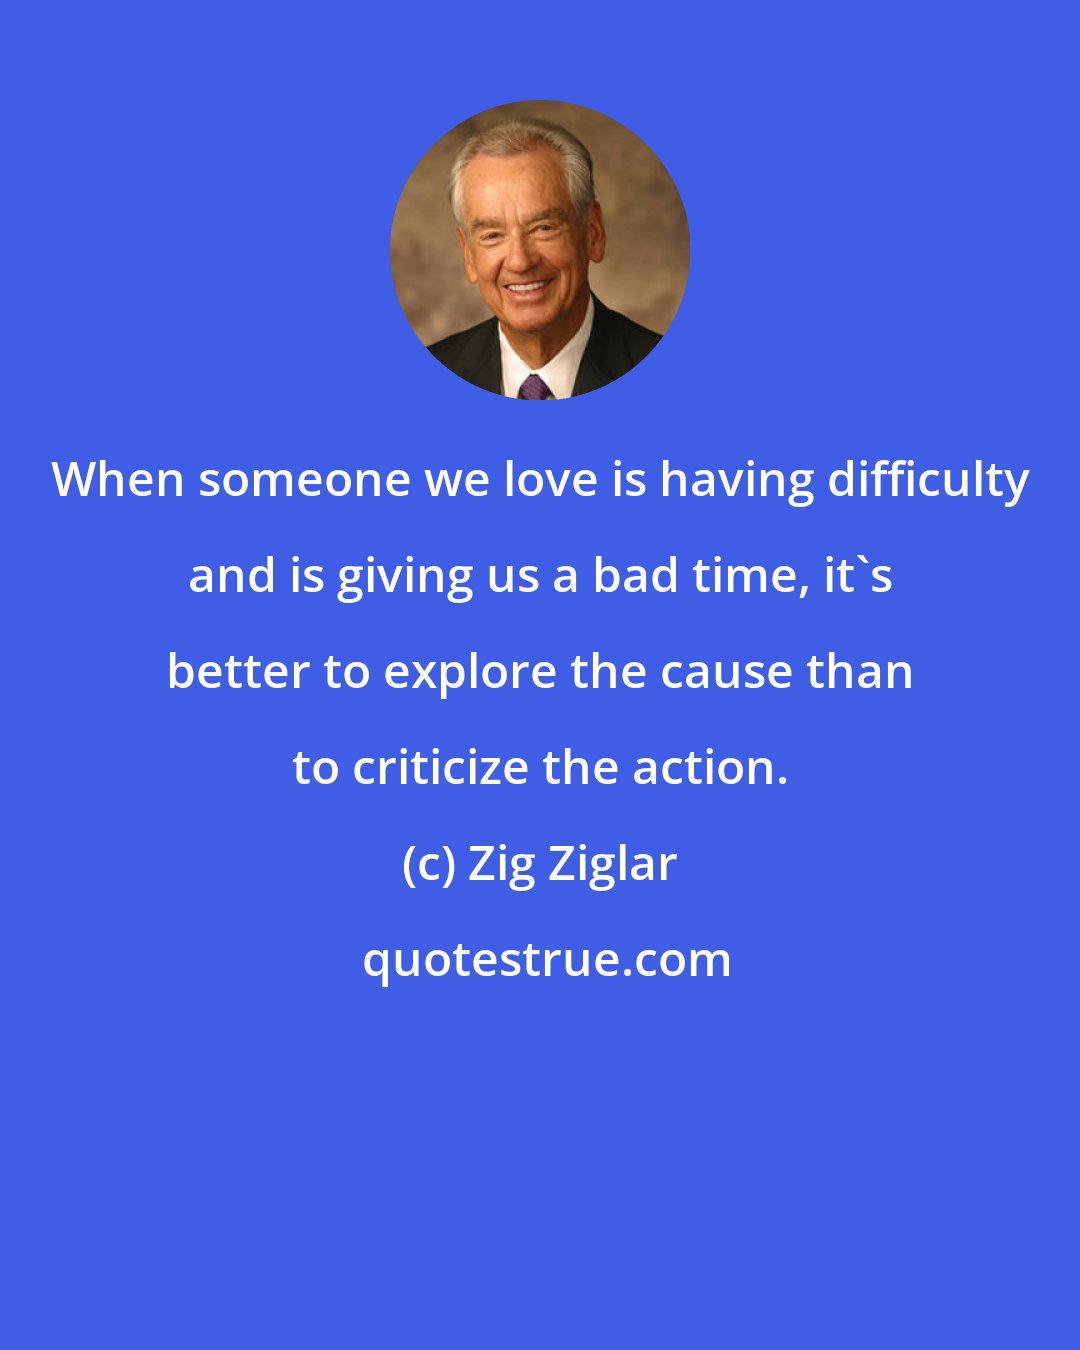 Zig Ziglar: When someone we love is having difficulty and is giving us a bad time, it's better to explore the cause than to criticize the action.